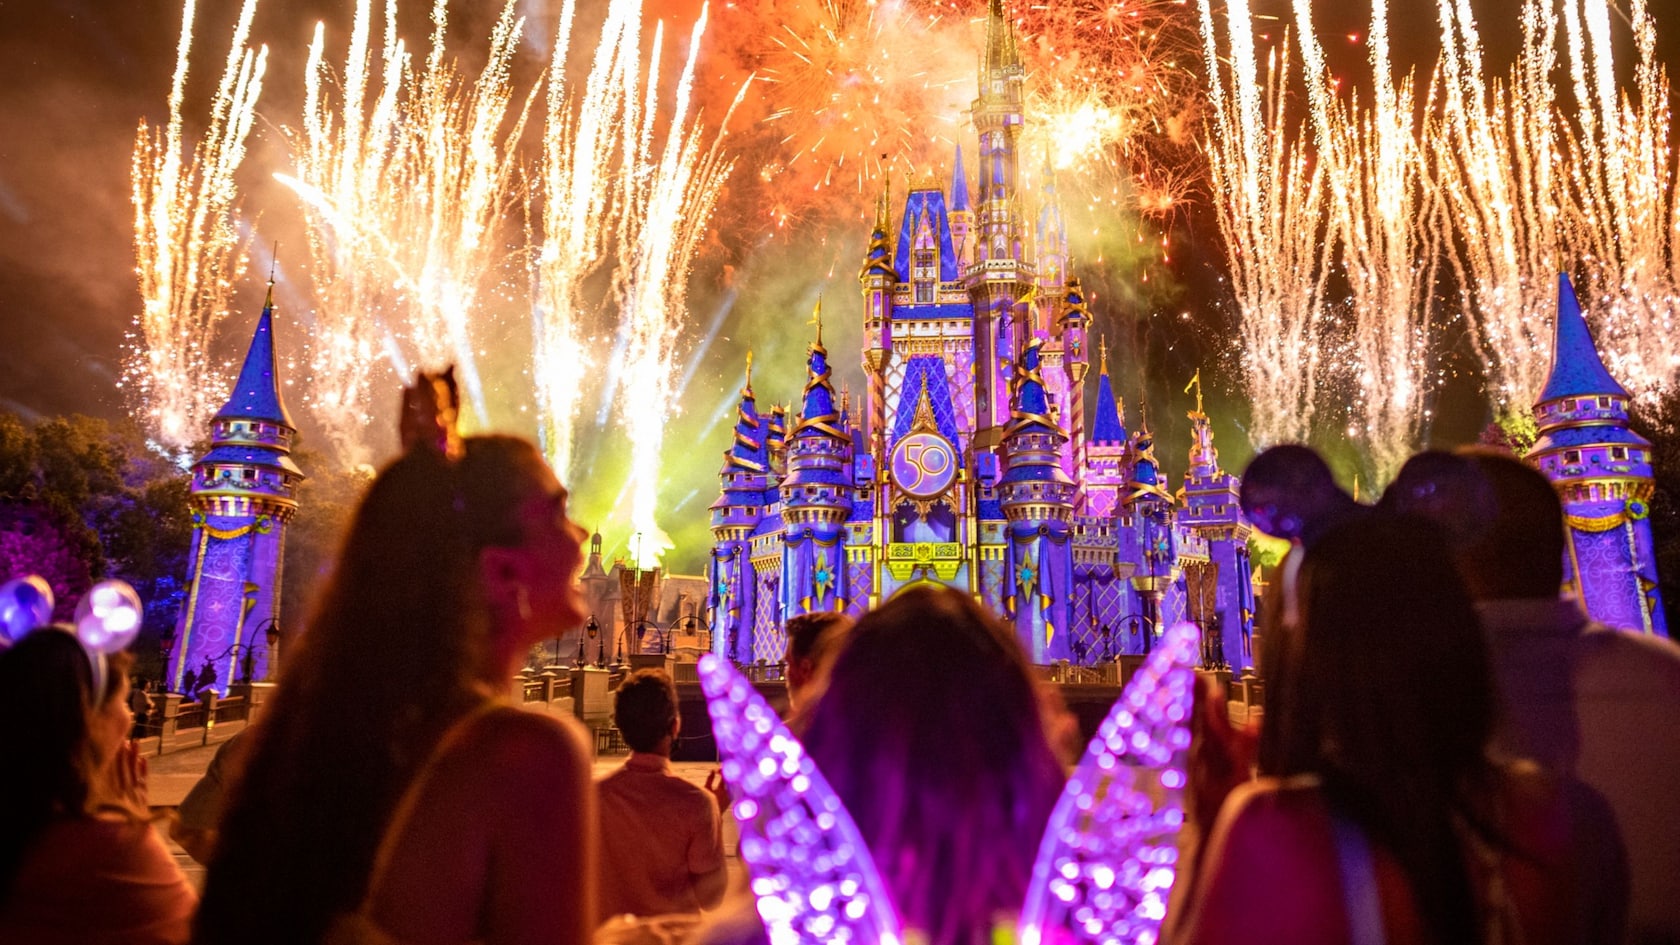 Disney Enchantment - A New Nighttime Spectacular featuring Fireworks, Disney Music, Enhanced Lighting and Projections– Coming October 1, 2021 | Walt Disney World Resort